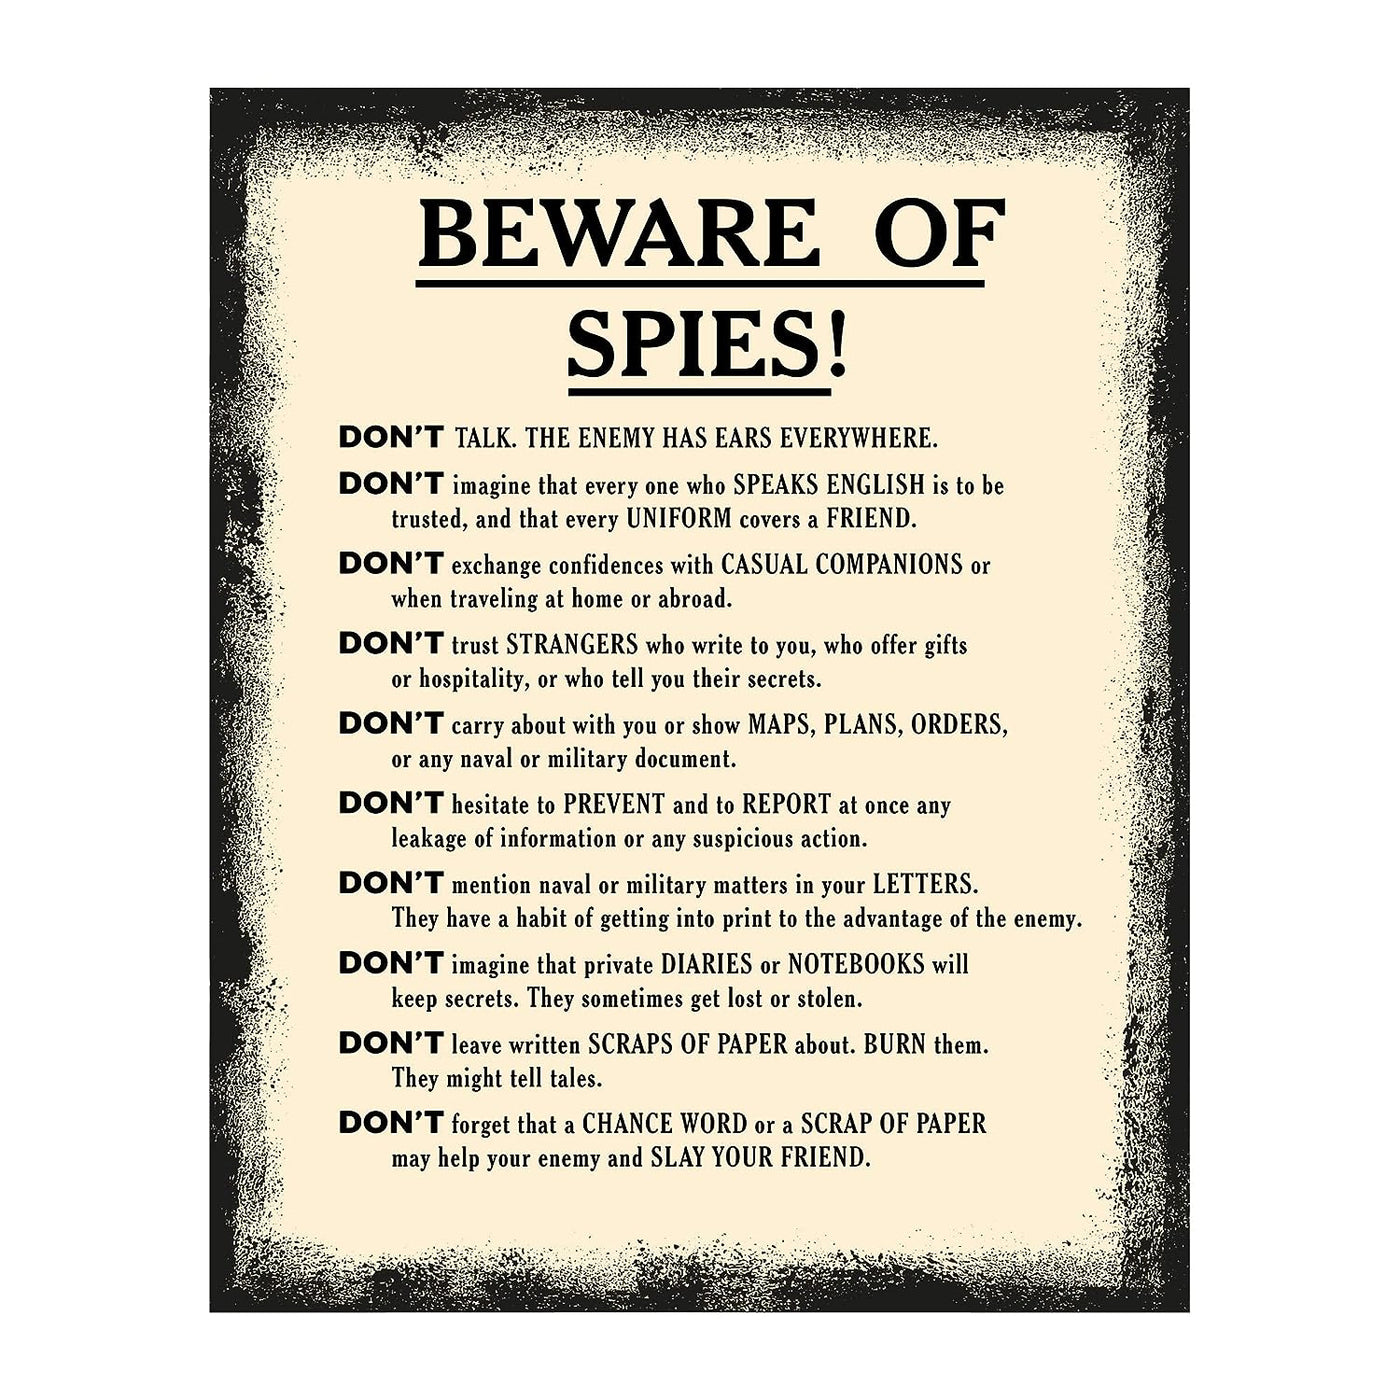 Beware of Spies-Funny Military Rules Sign - 8 x 10" Modern Typographic Wall Art Print-Ready to Frame. Humorous Patriotic Decor for Home-Office-Garage-Cave-Shop. Fun Gift for Soldiers & Veterans!